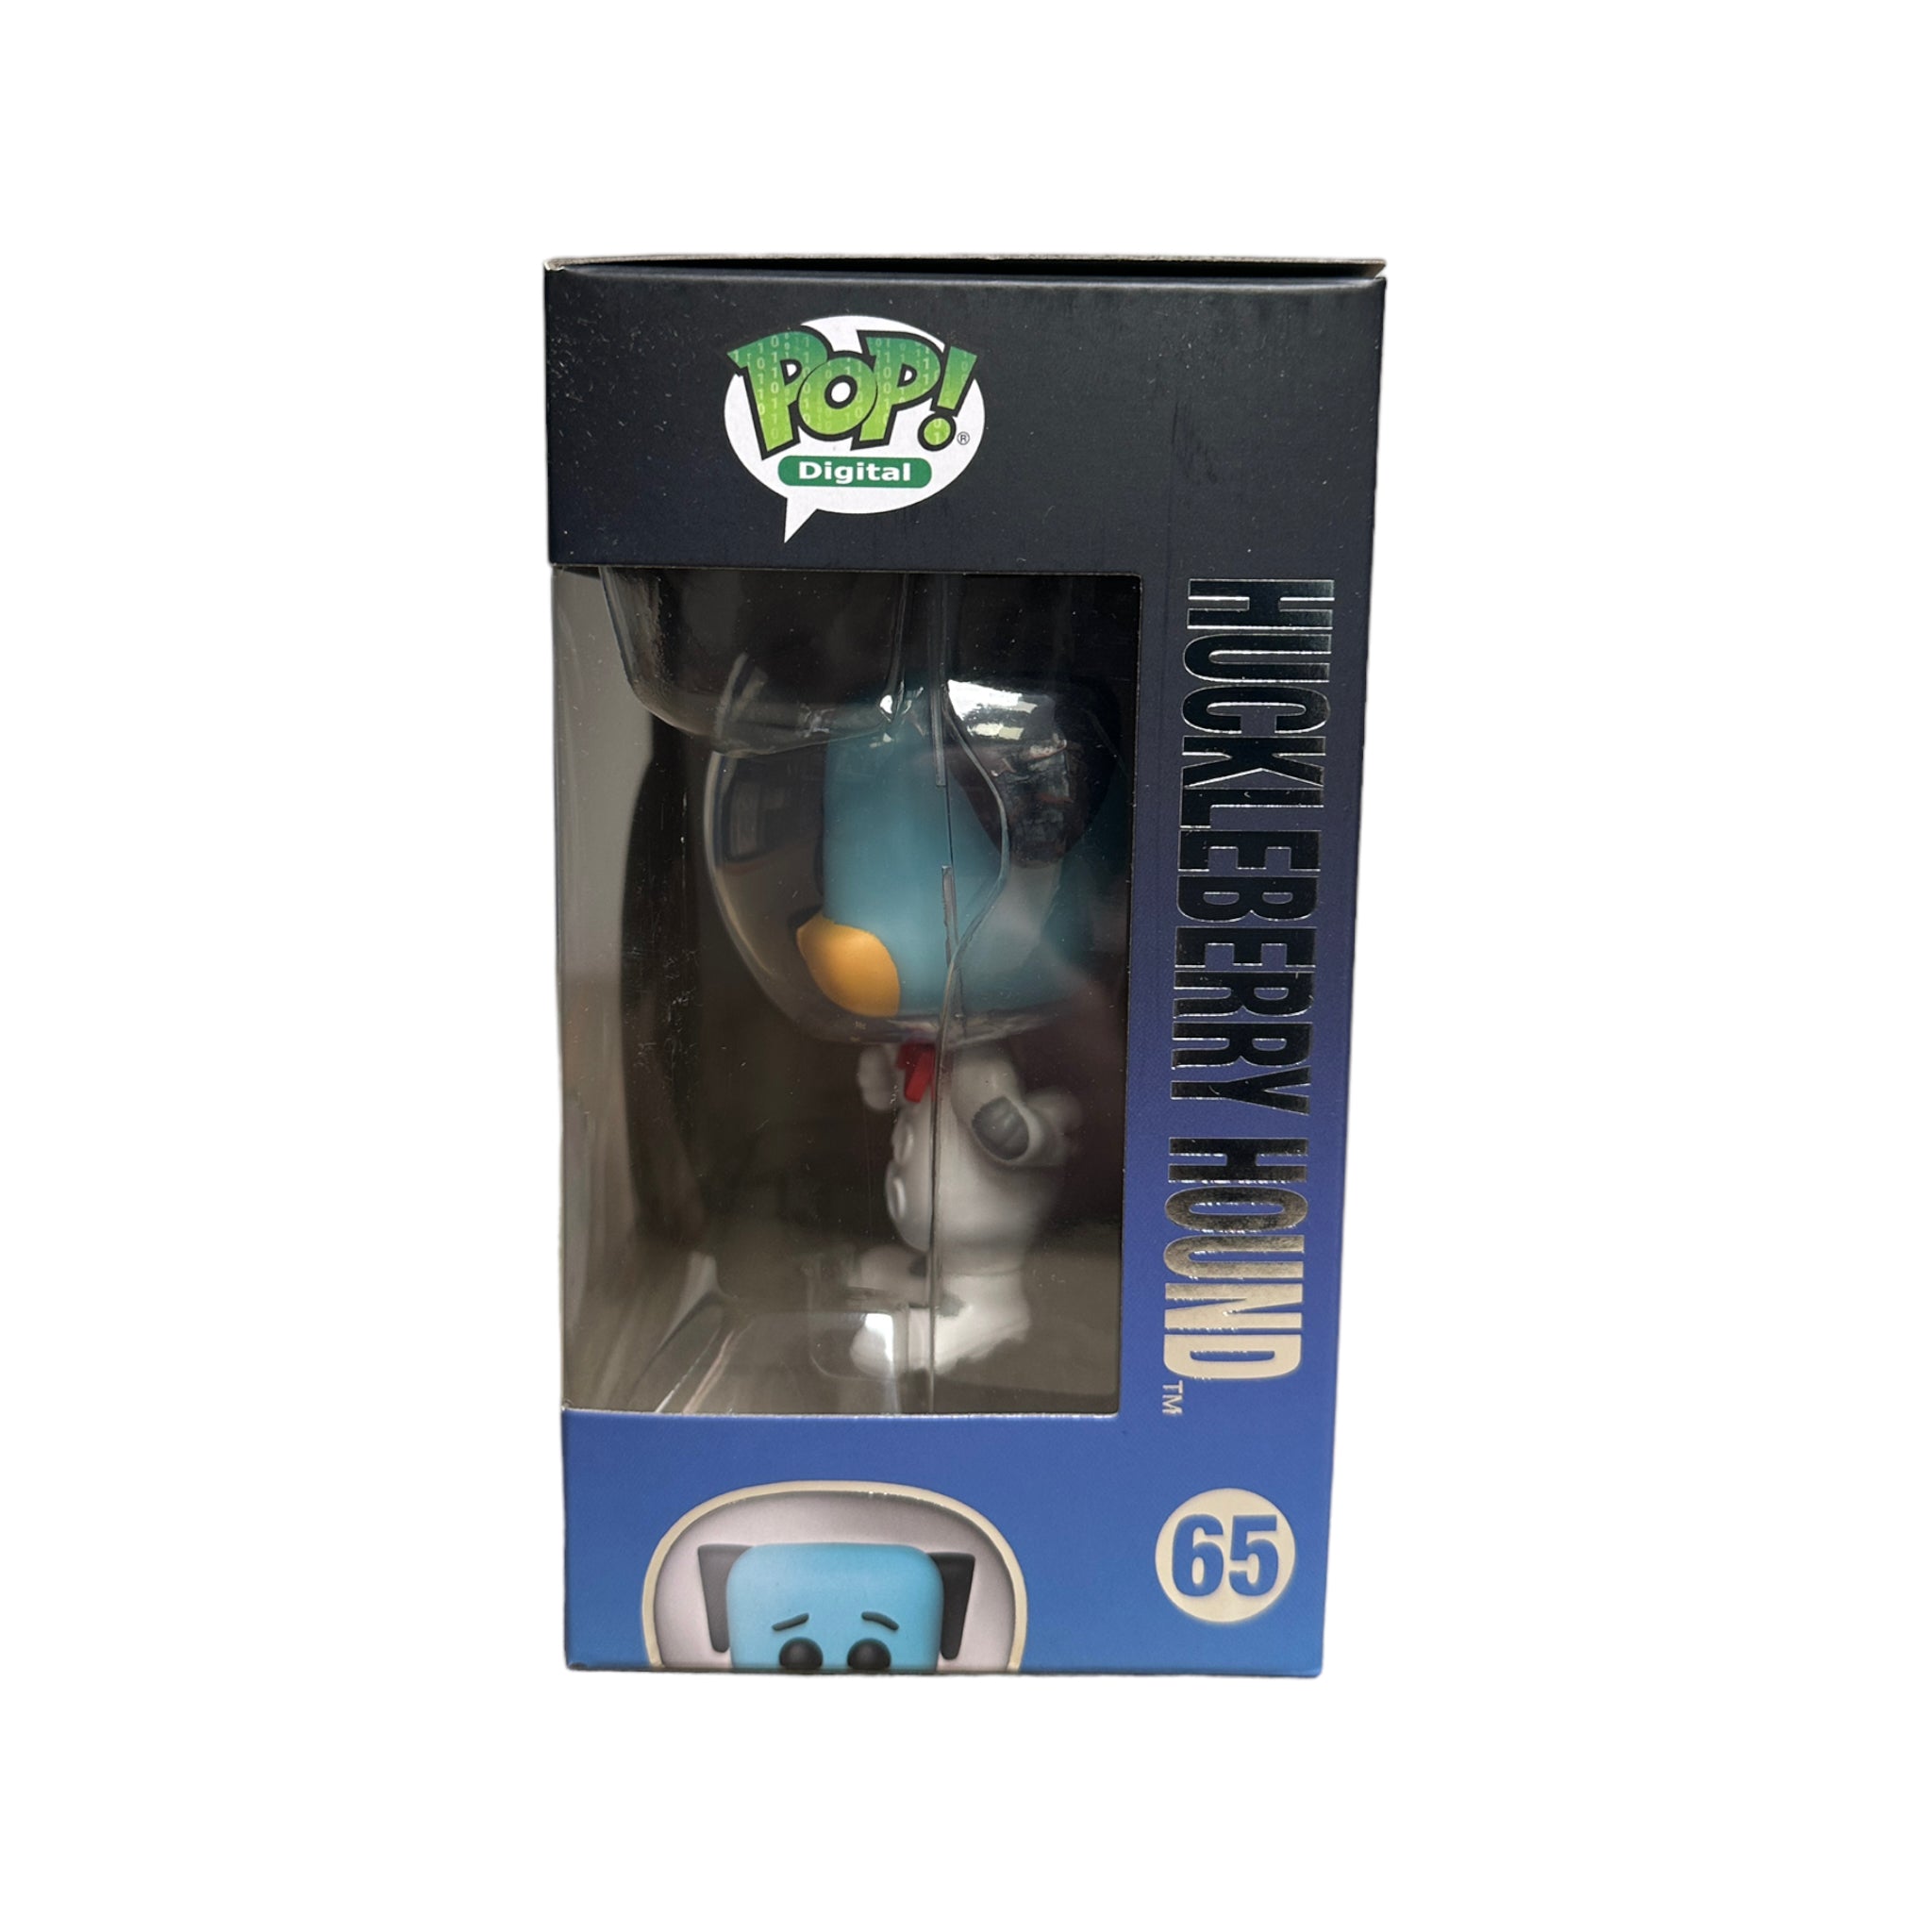 Huckleberry Hound #65 Funko Pop! - Huckleberry Hound - NFT Release Exclusive LE999 Pcs - Condition 9/10